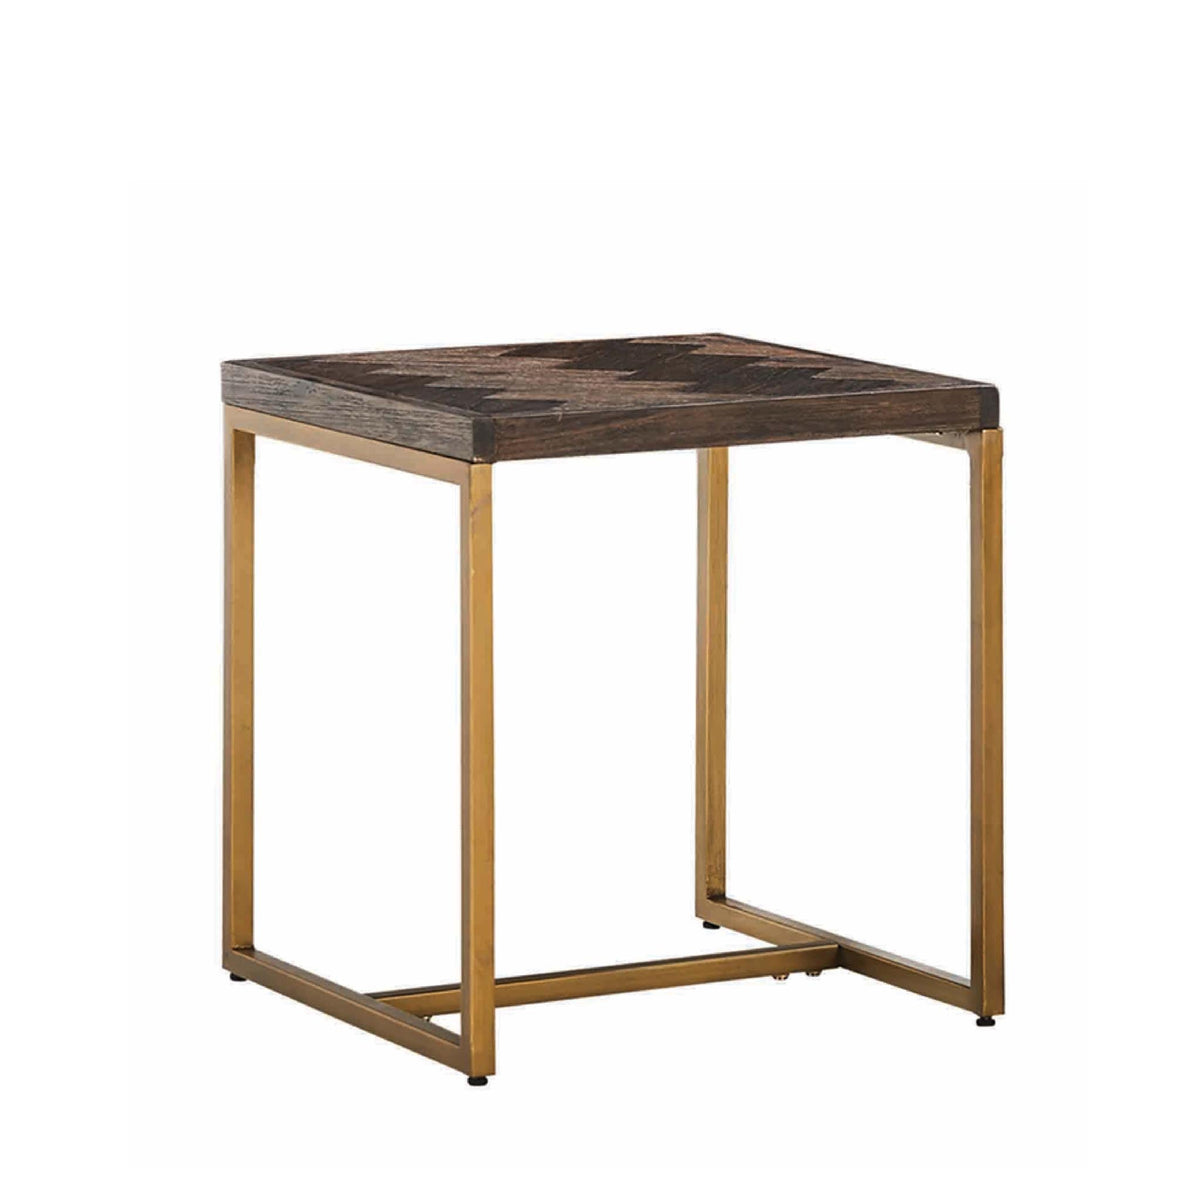 Houston Acacia Wooden Sofa Side Lamp Table from Roseland